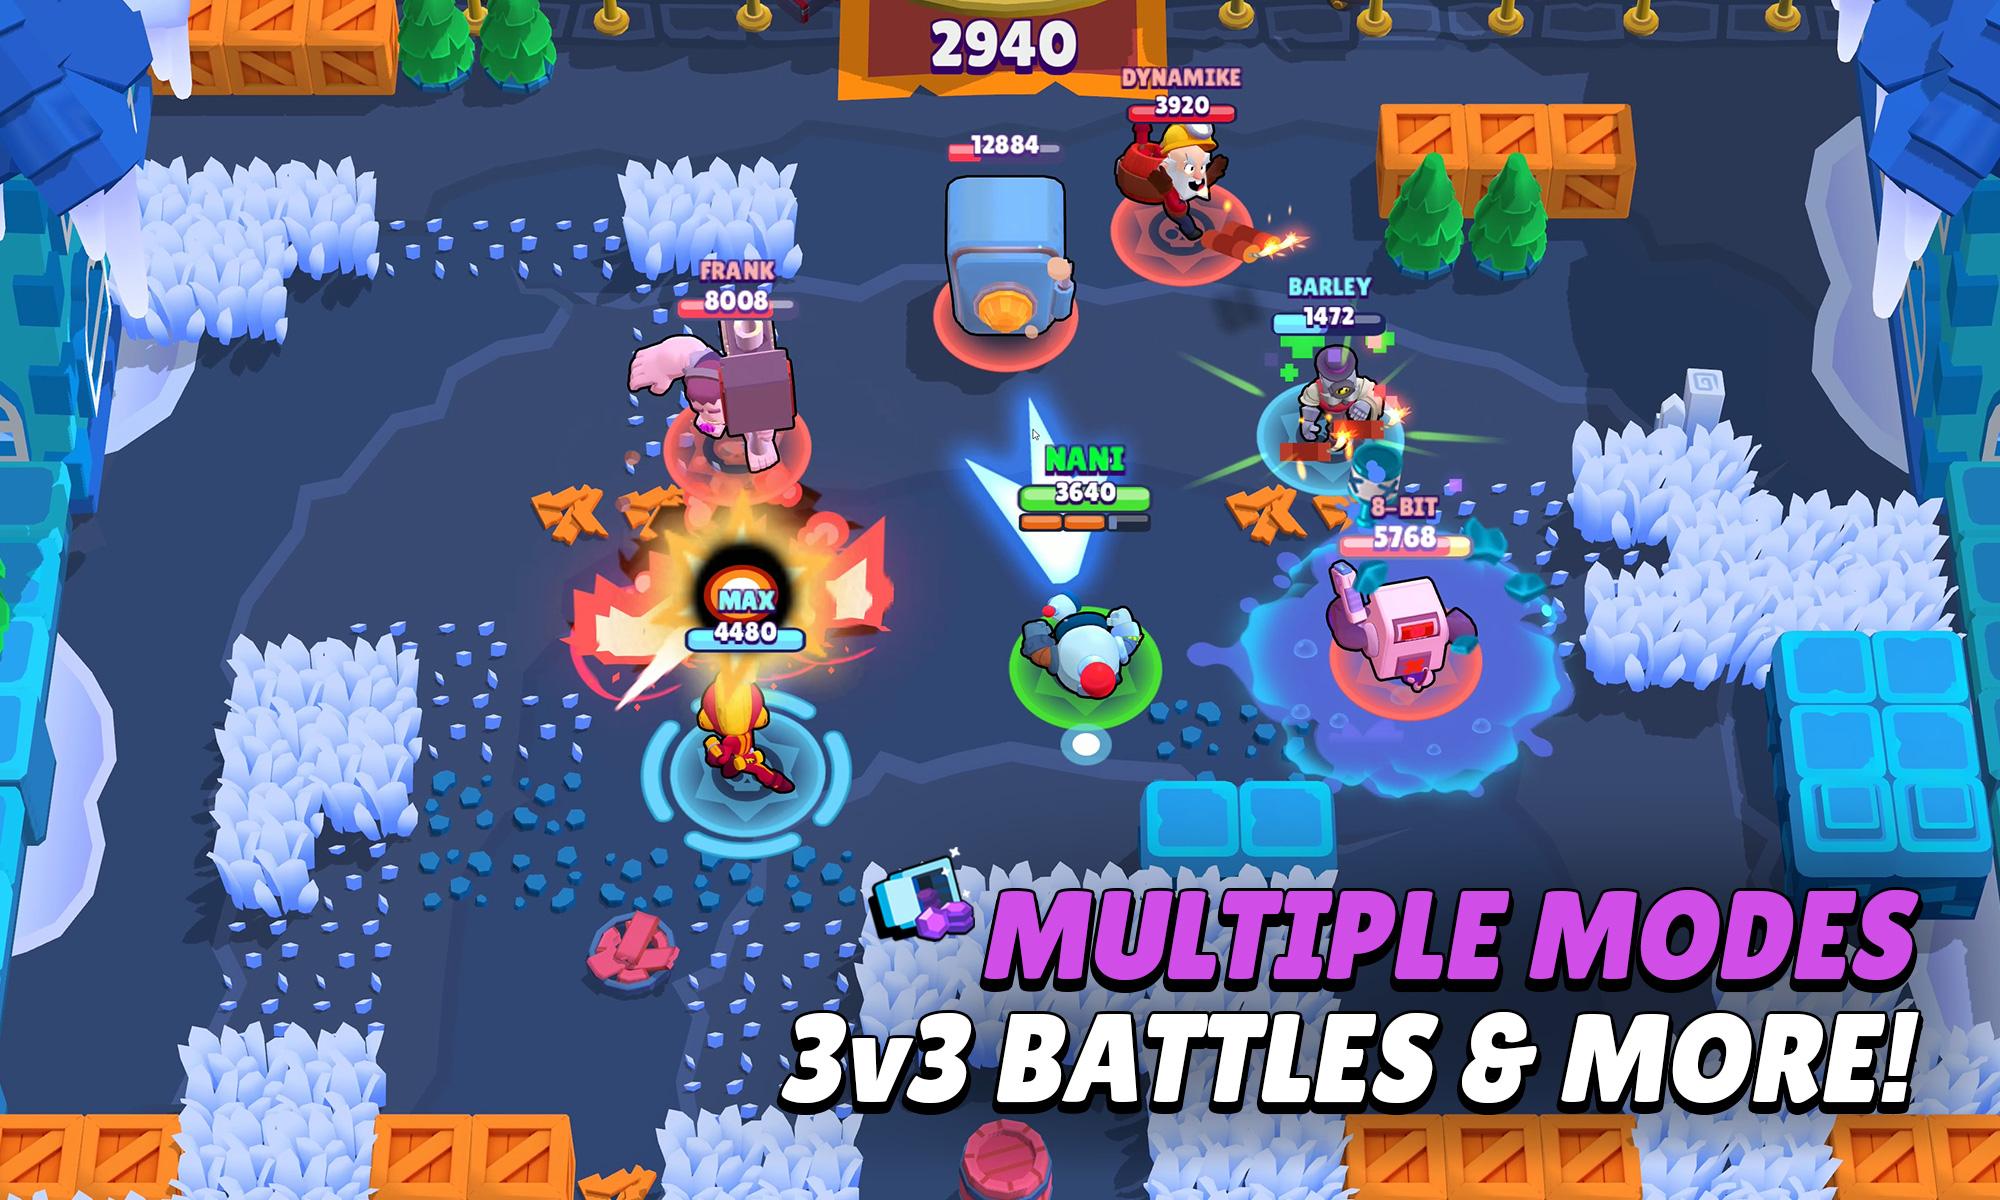 Brawl Stars Apk Download Pick Up Your Hero Characters In 3v3 Smash And Grab Mode Brock Shelly Jessie And Barley - brawl stars musics battle 3